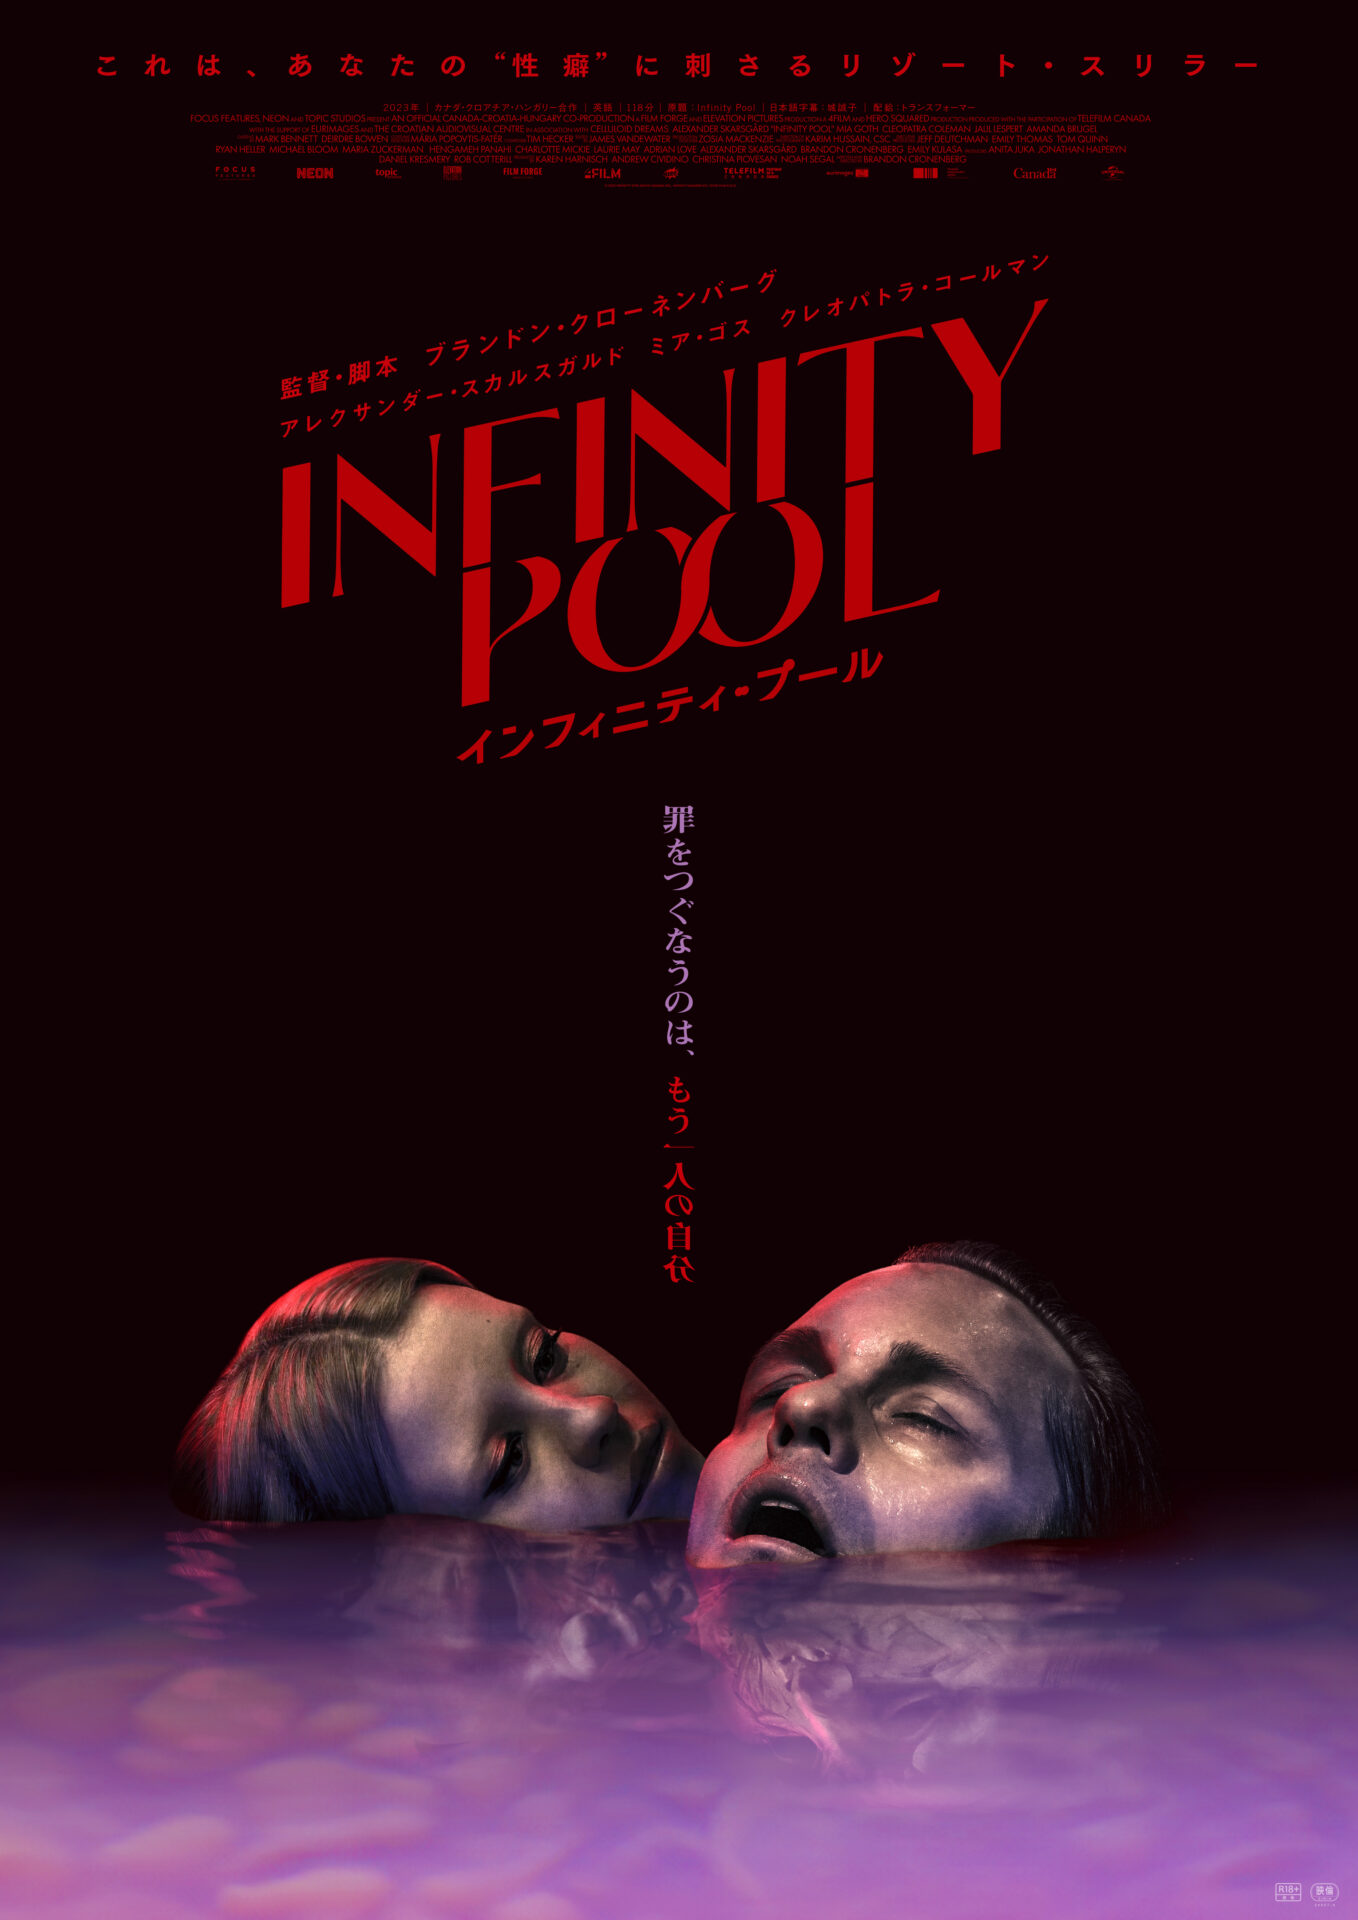  © 2022 Infinity (FFP) Movie Canada Inc., Infinity Squared KFT, Cetiri Film d.o.o. All Rights Reserved.